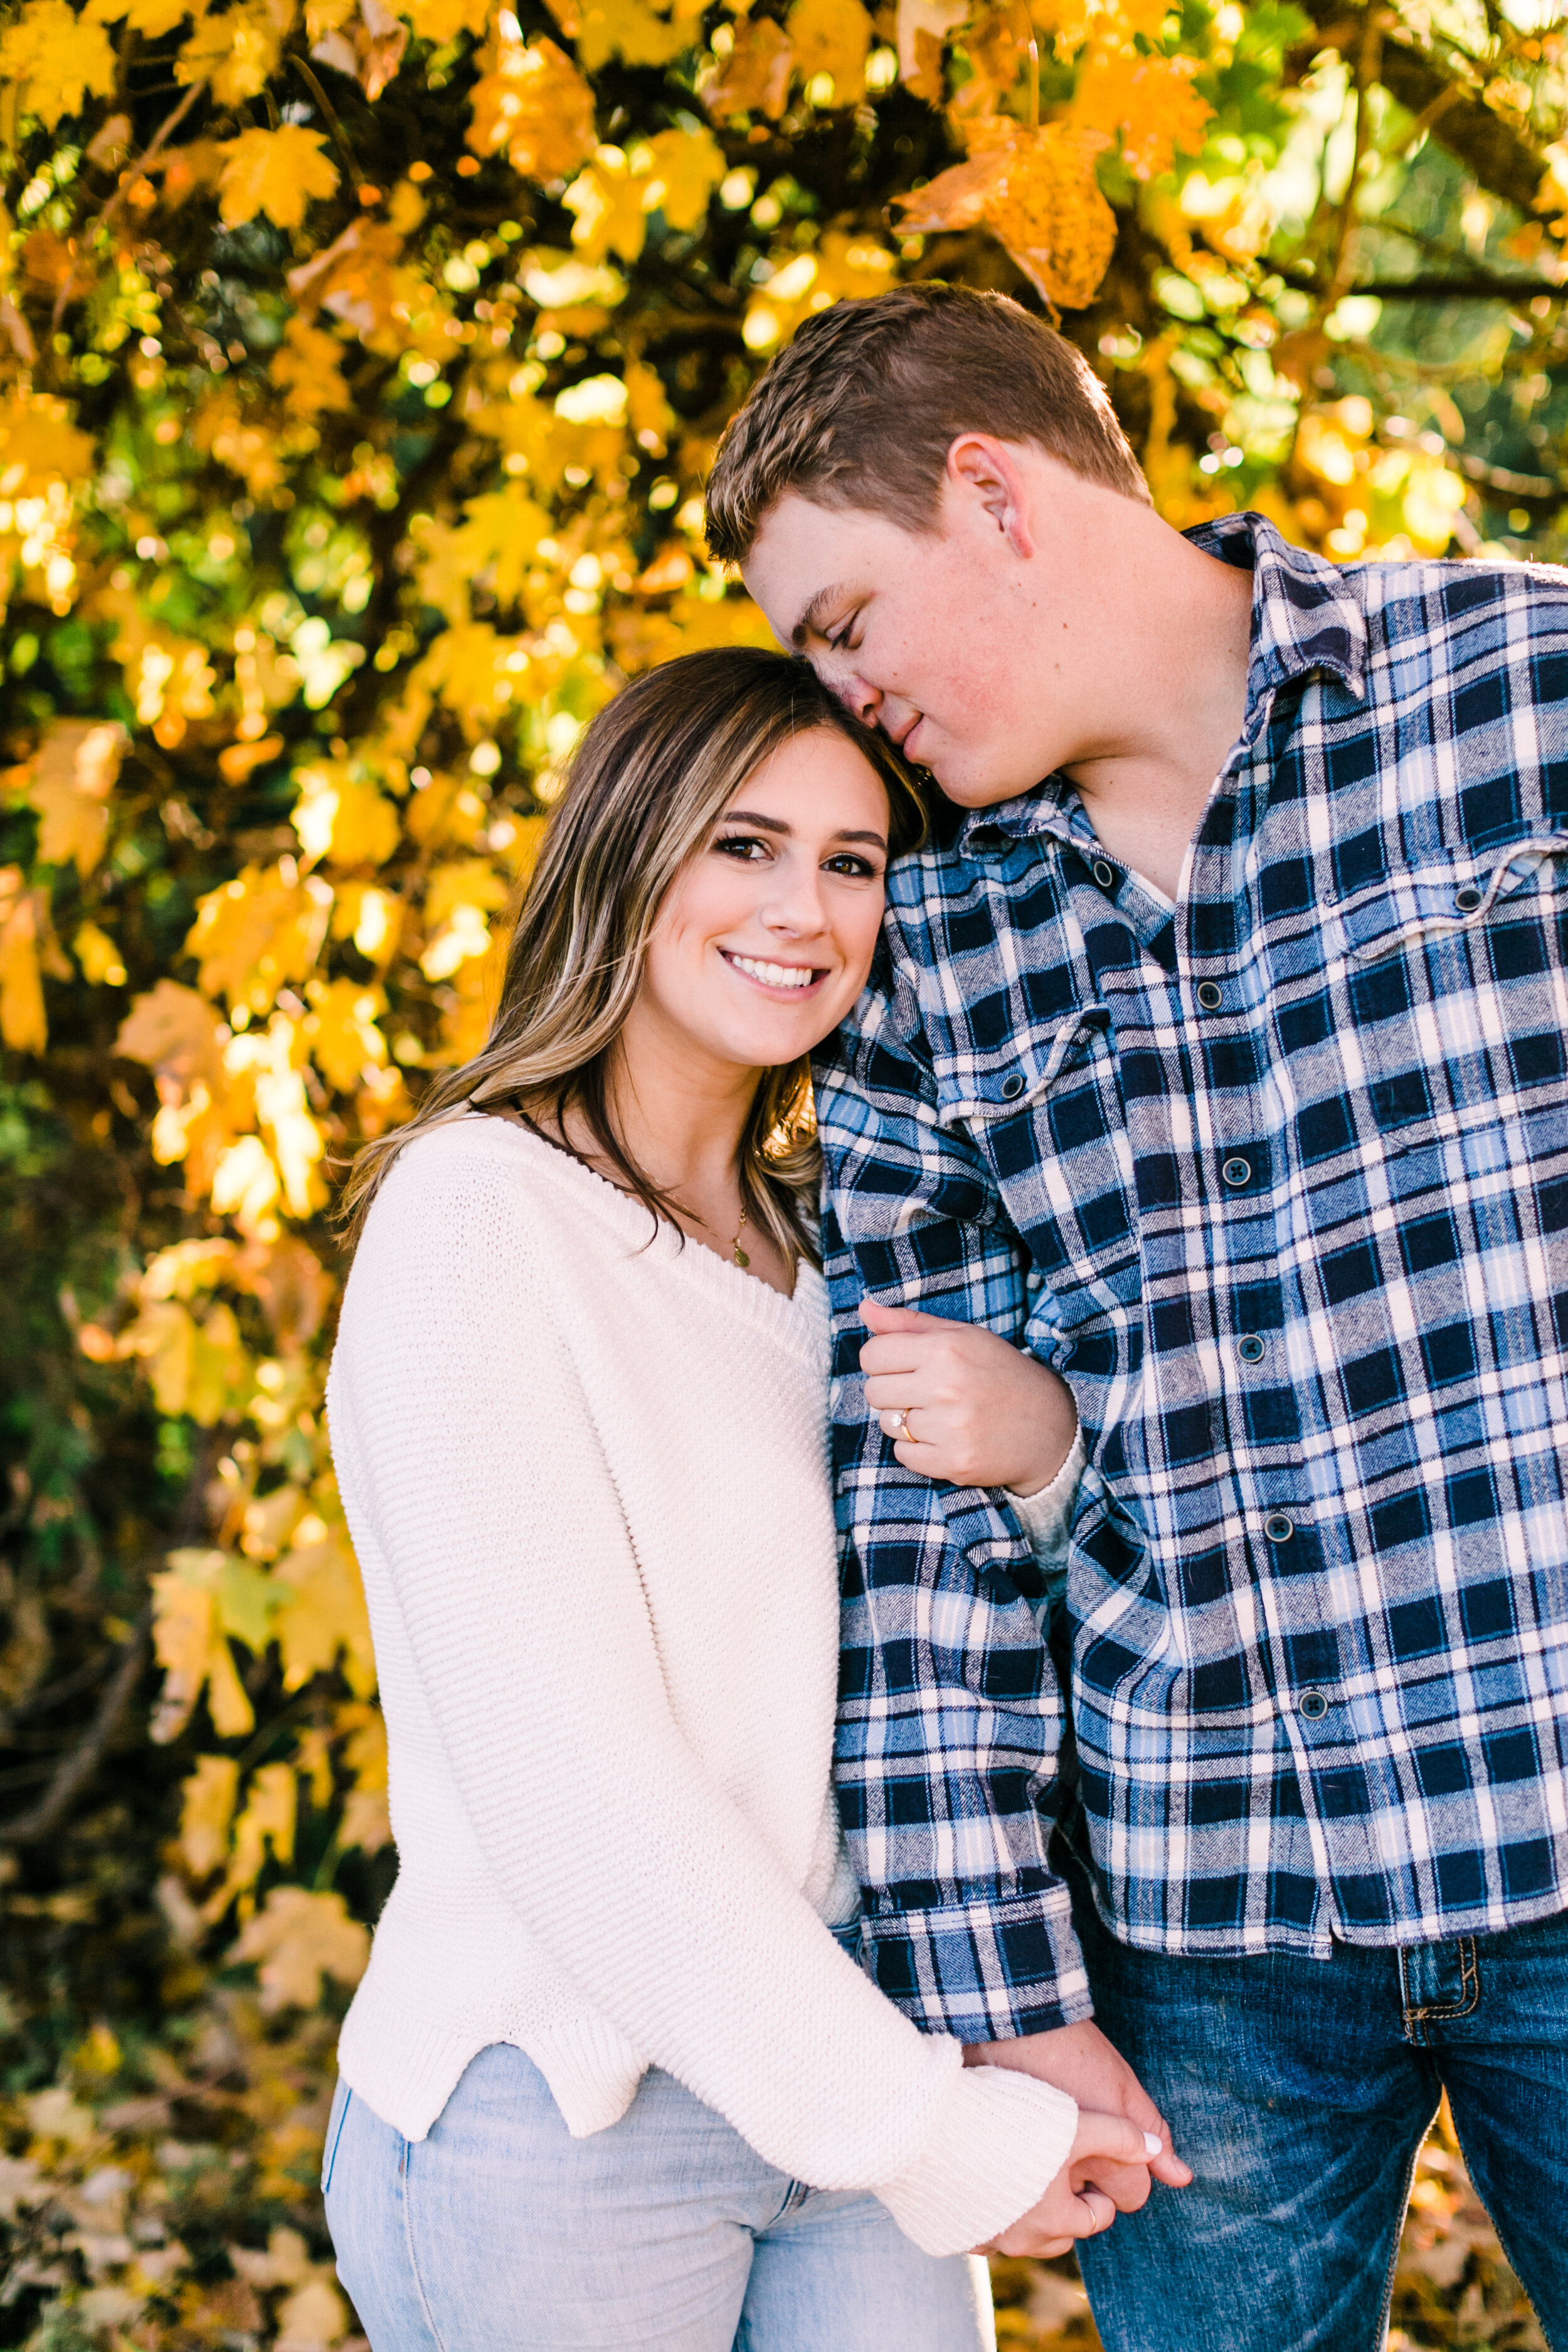 Tennessee+Fall+Engagement+Photos+Puppy (23 of 63).jpg